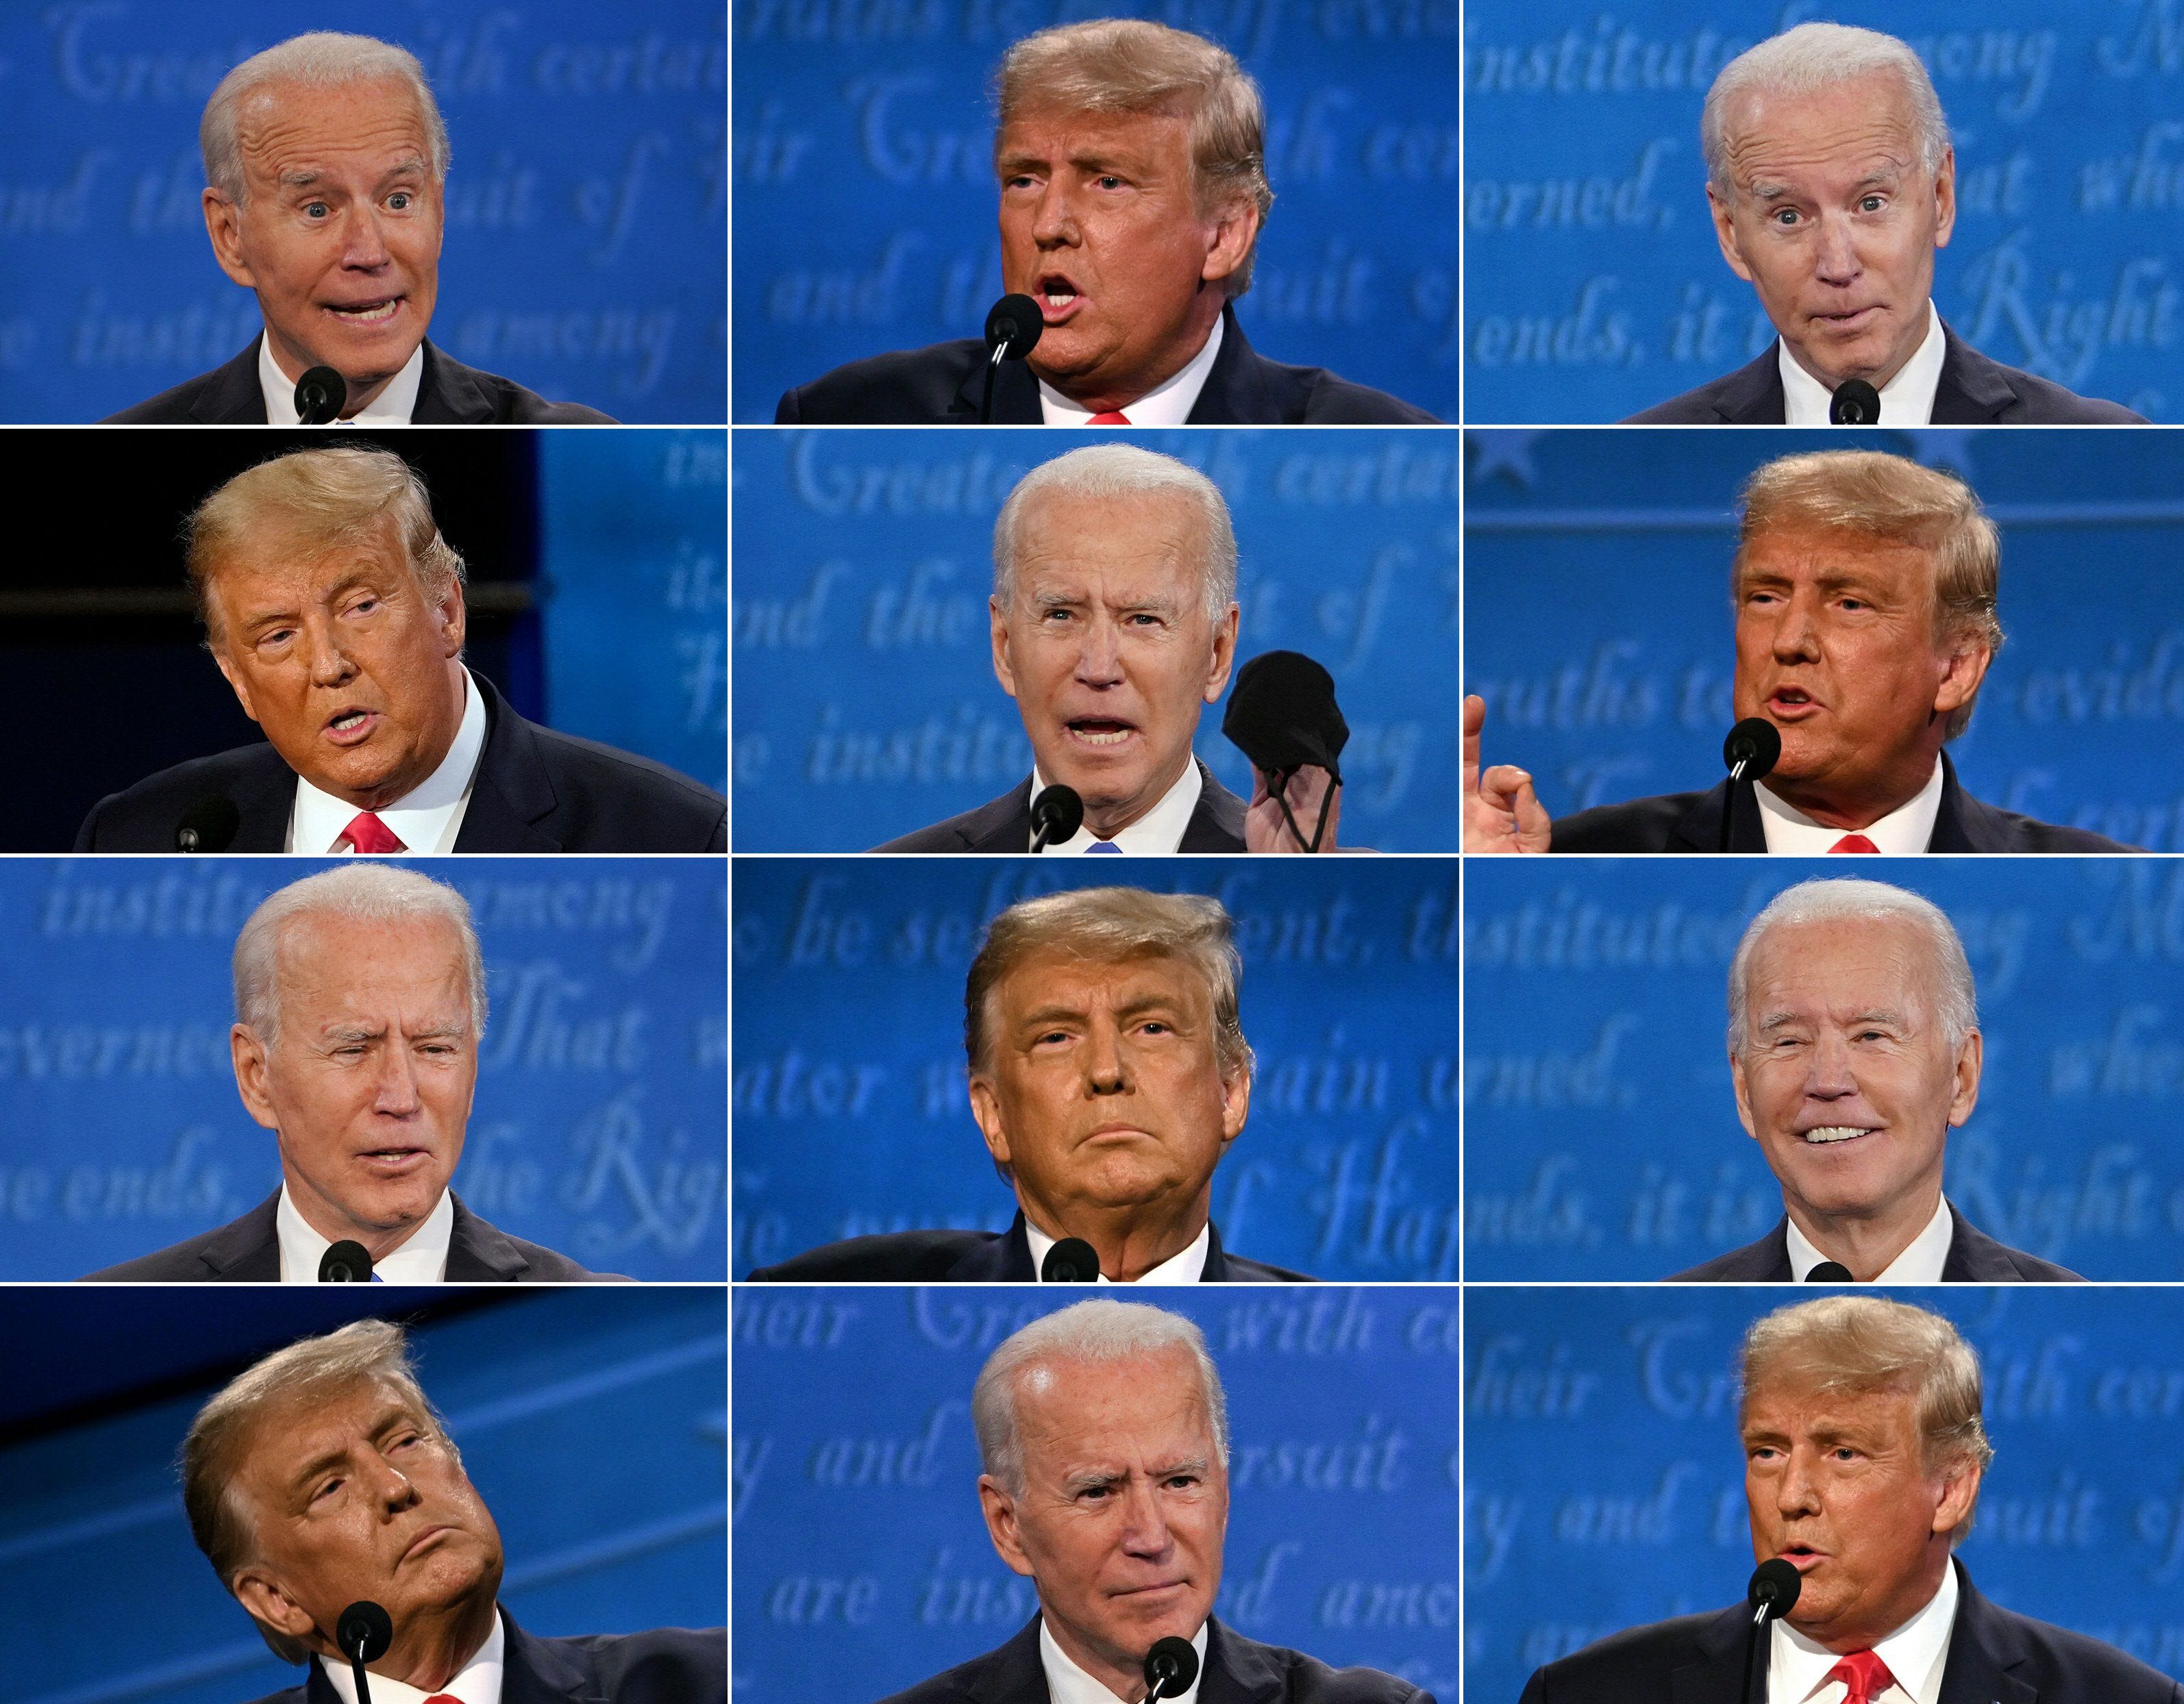 Let's be honest. The Biden-Trump debates could be a welcomed break for angry voters.